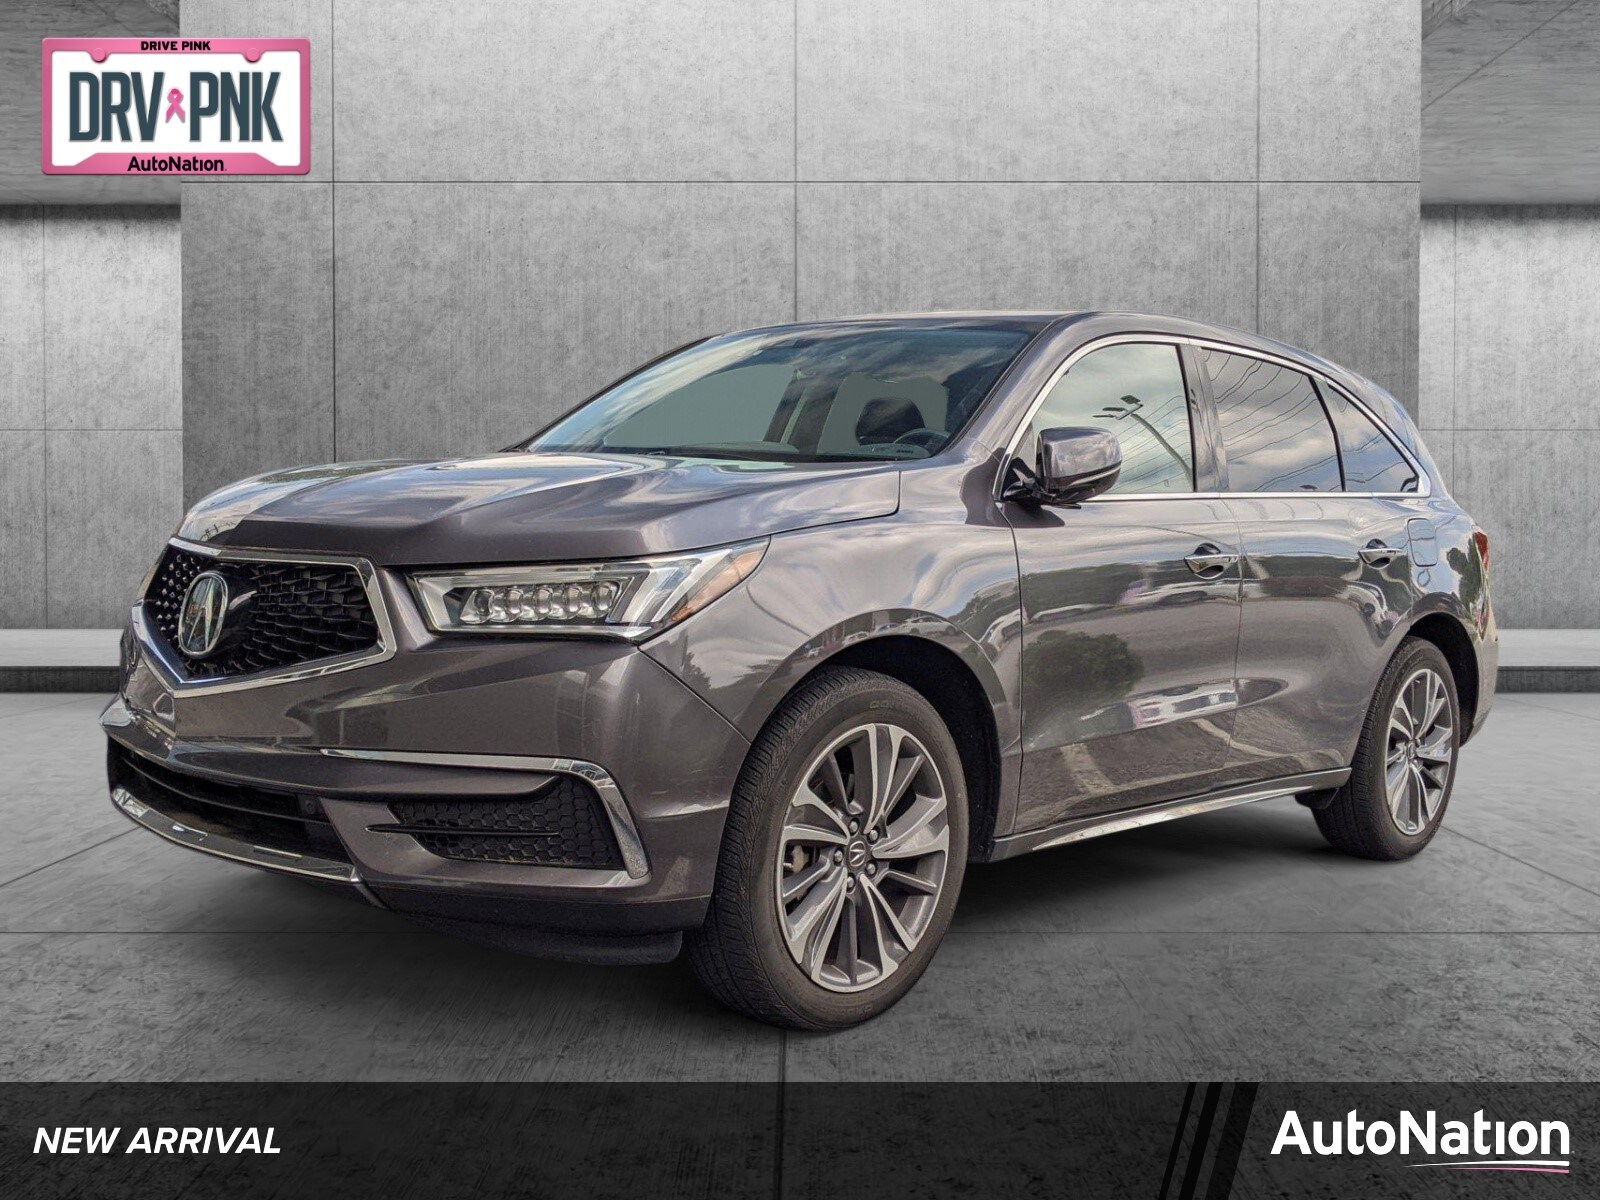 Used Acura Mdx Towson Md